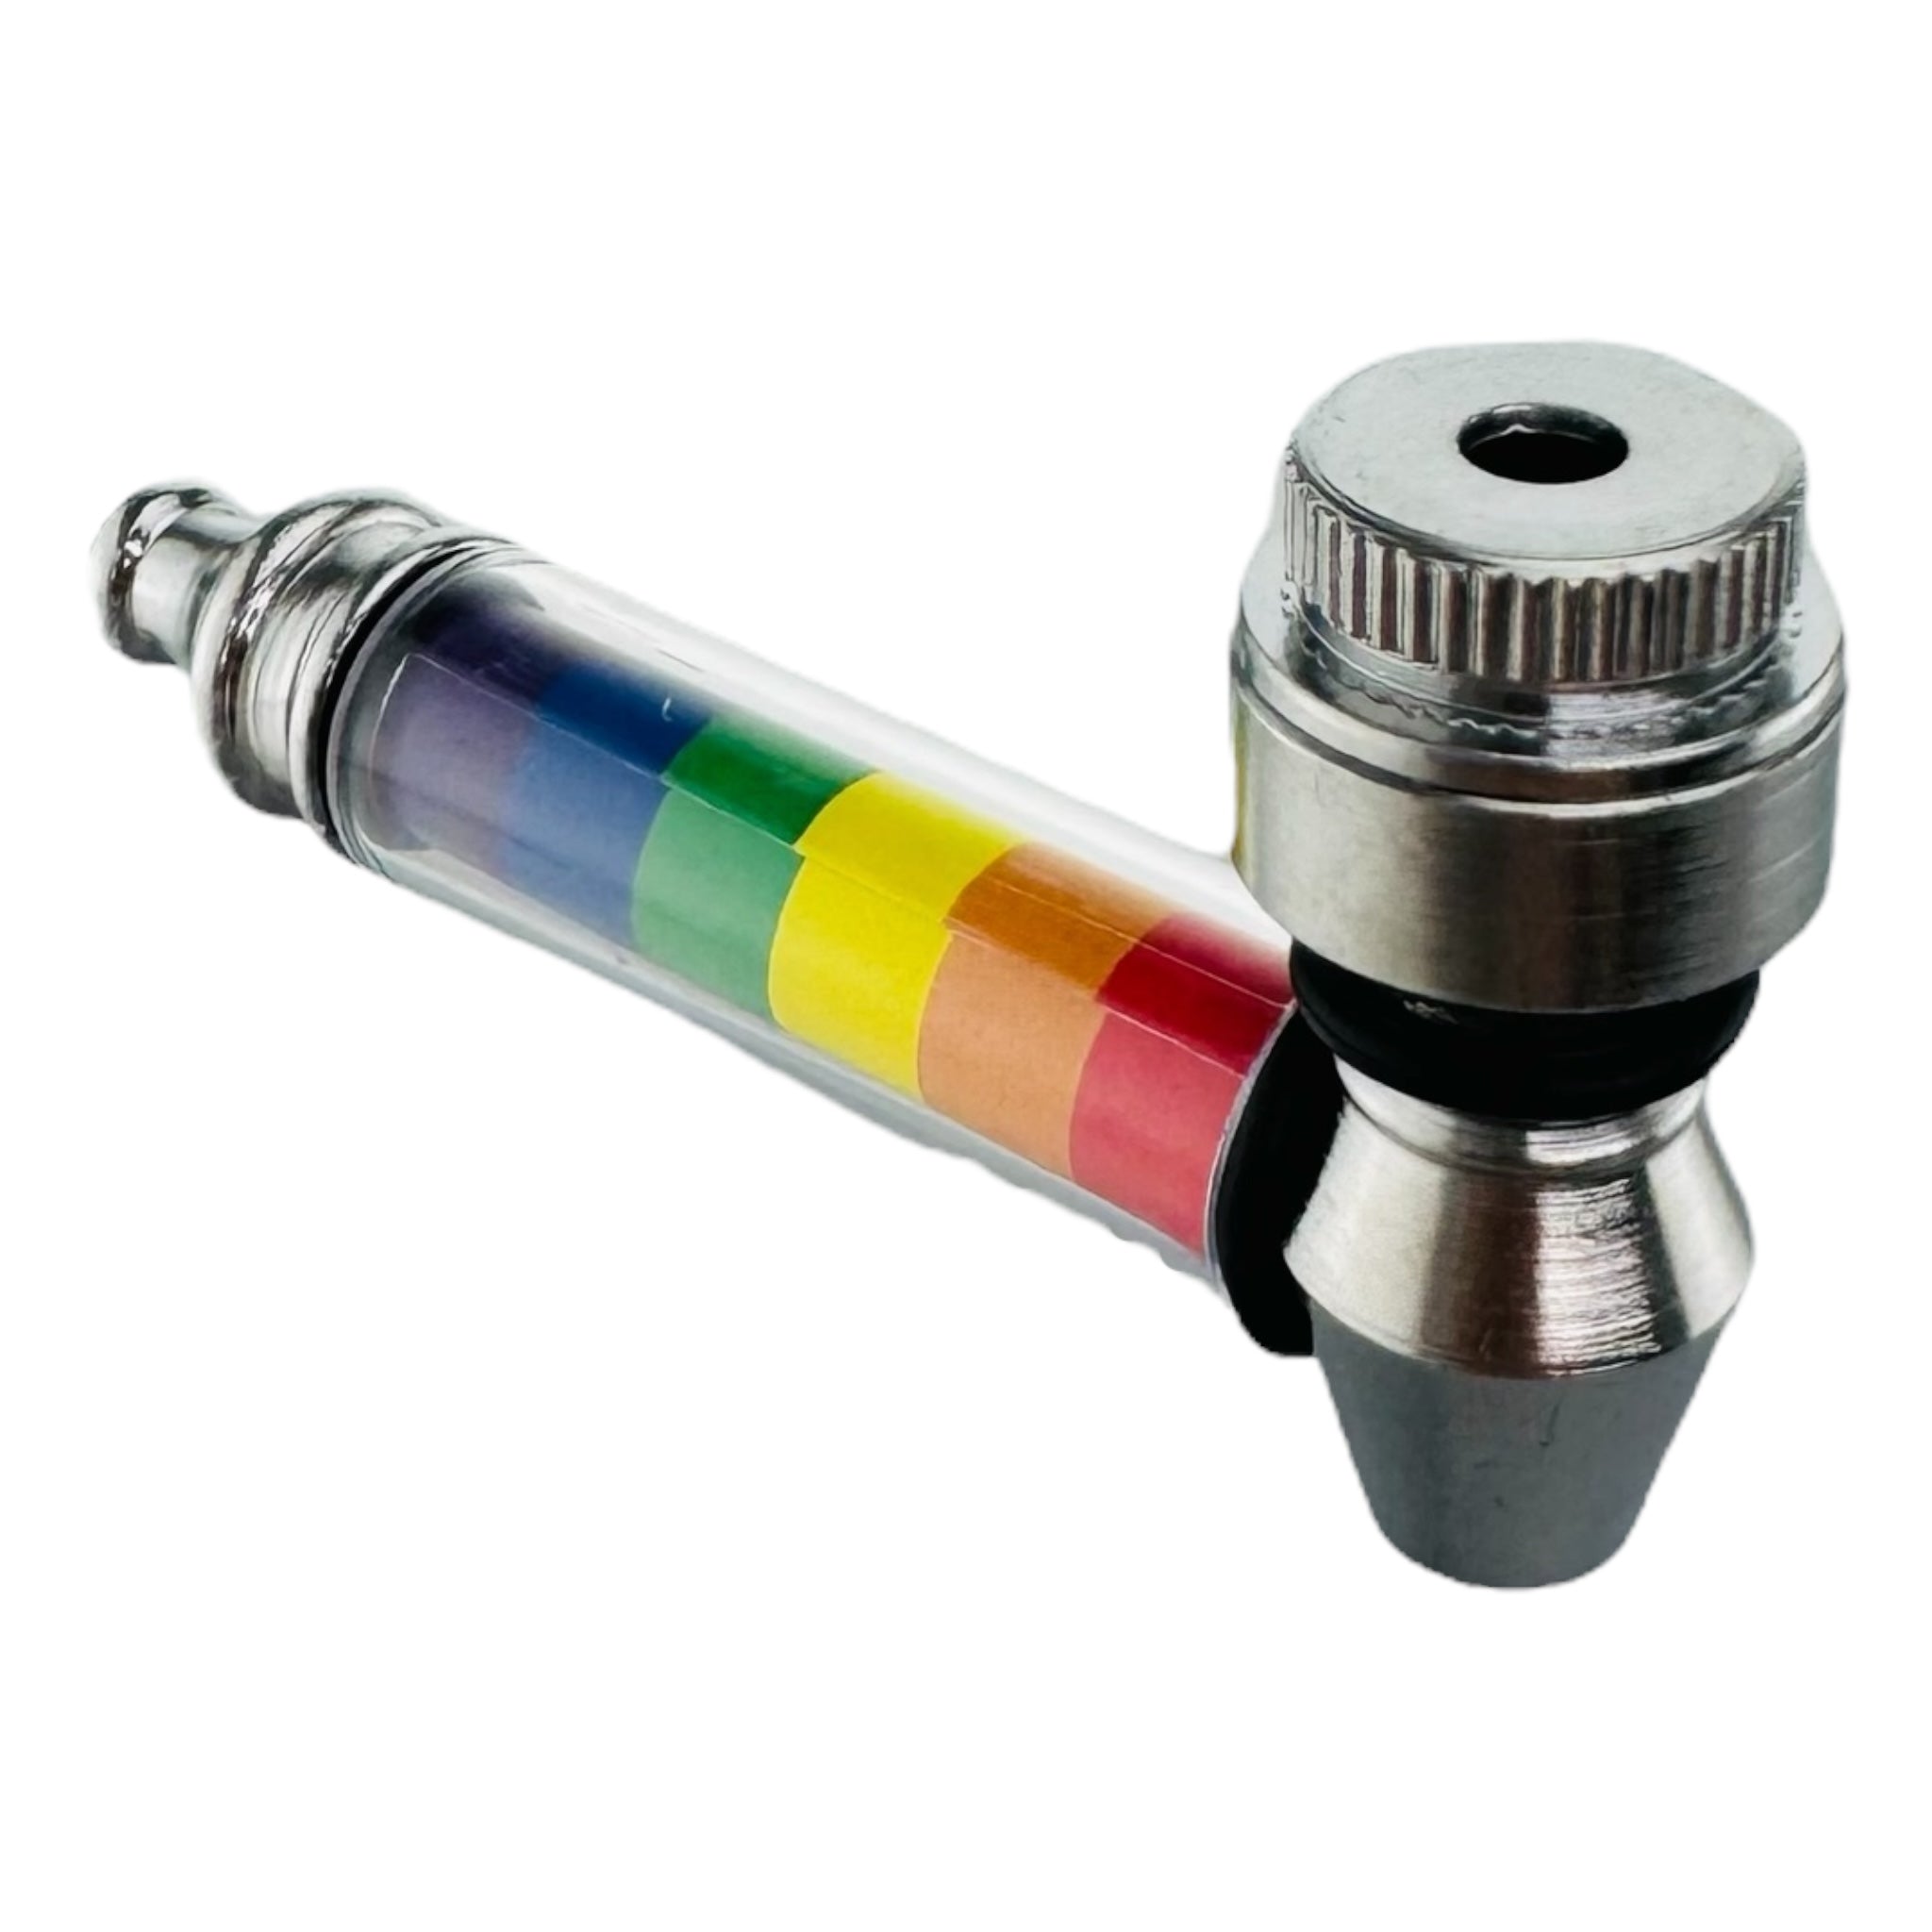 Metal Hand Pipes - Silver Chrome Hand Pipe With Rainbow Plastic Stem